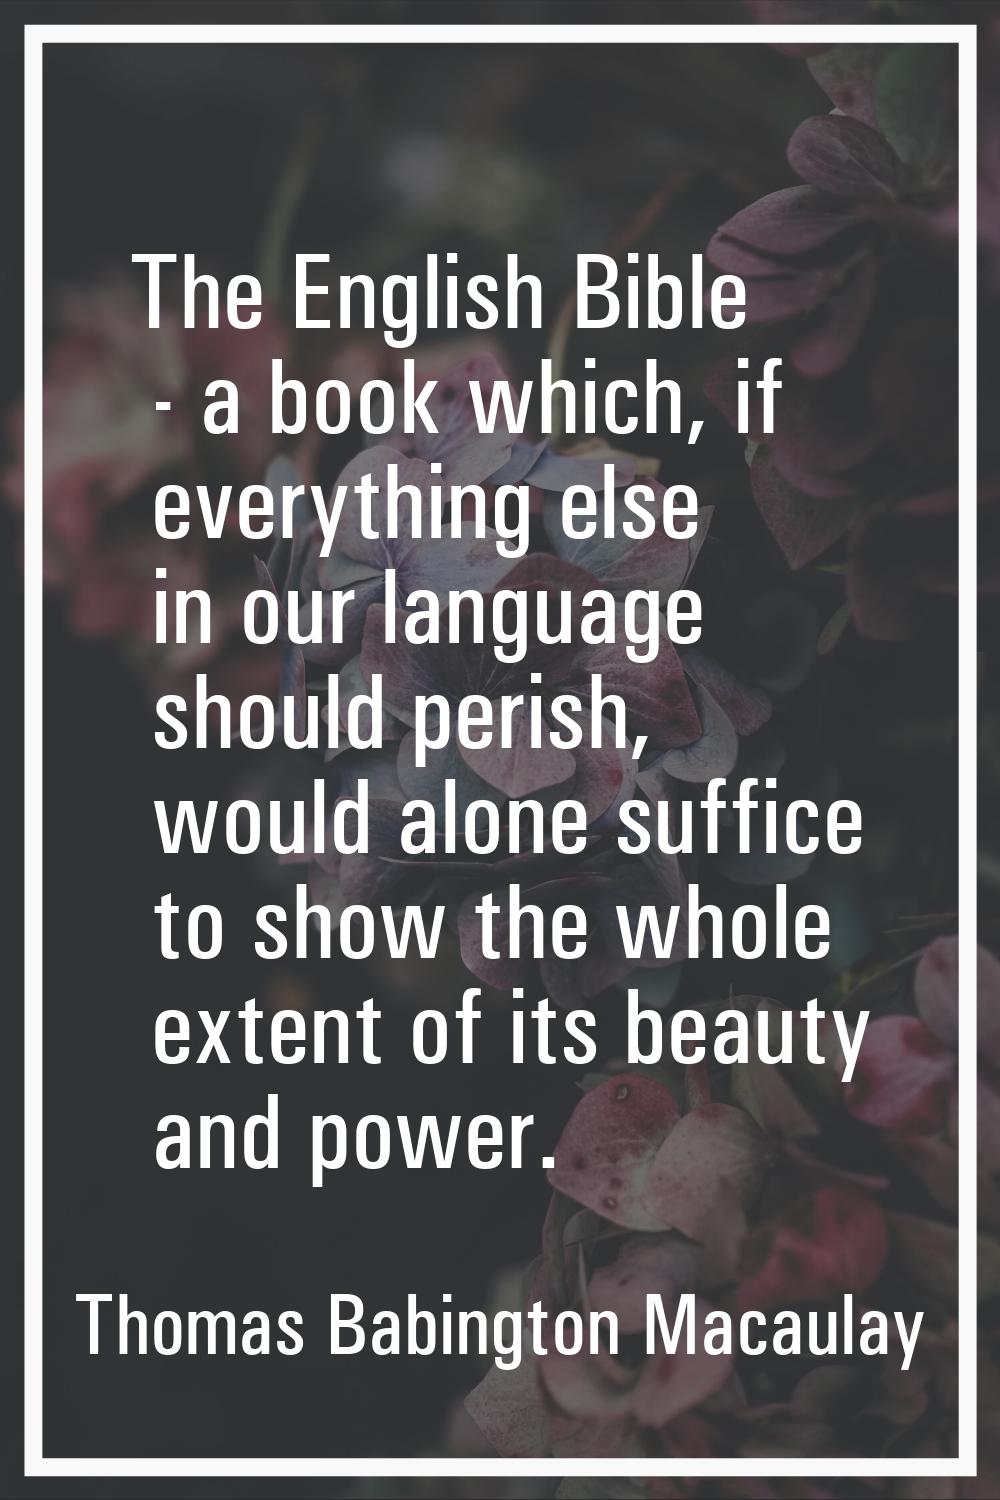 The English Bible - a book which, if everything else in our language should perish, would alone suf